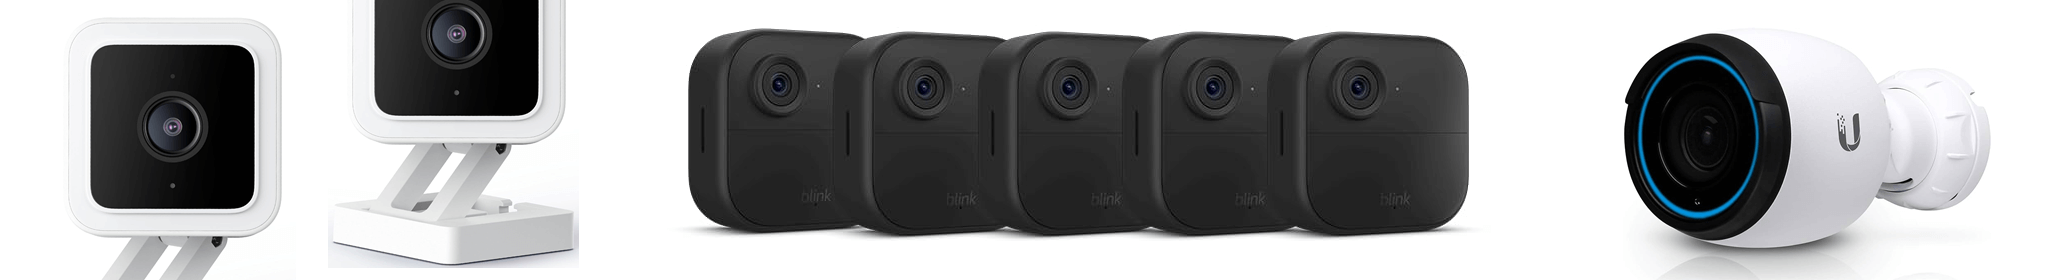 Smart cameras for your home. Wyze, Blink, or Ubiquiti